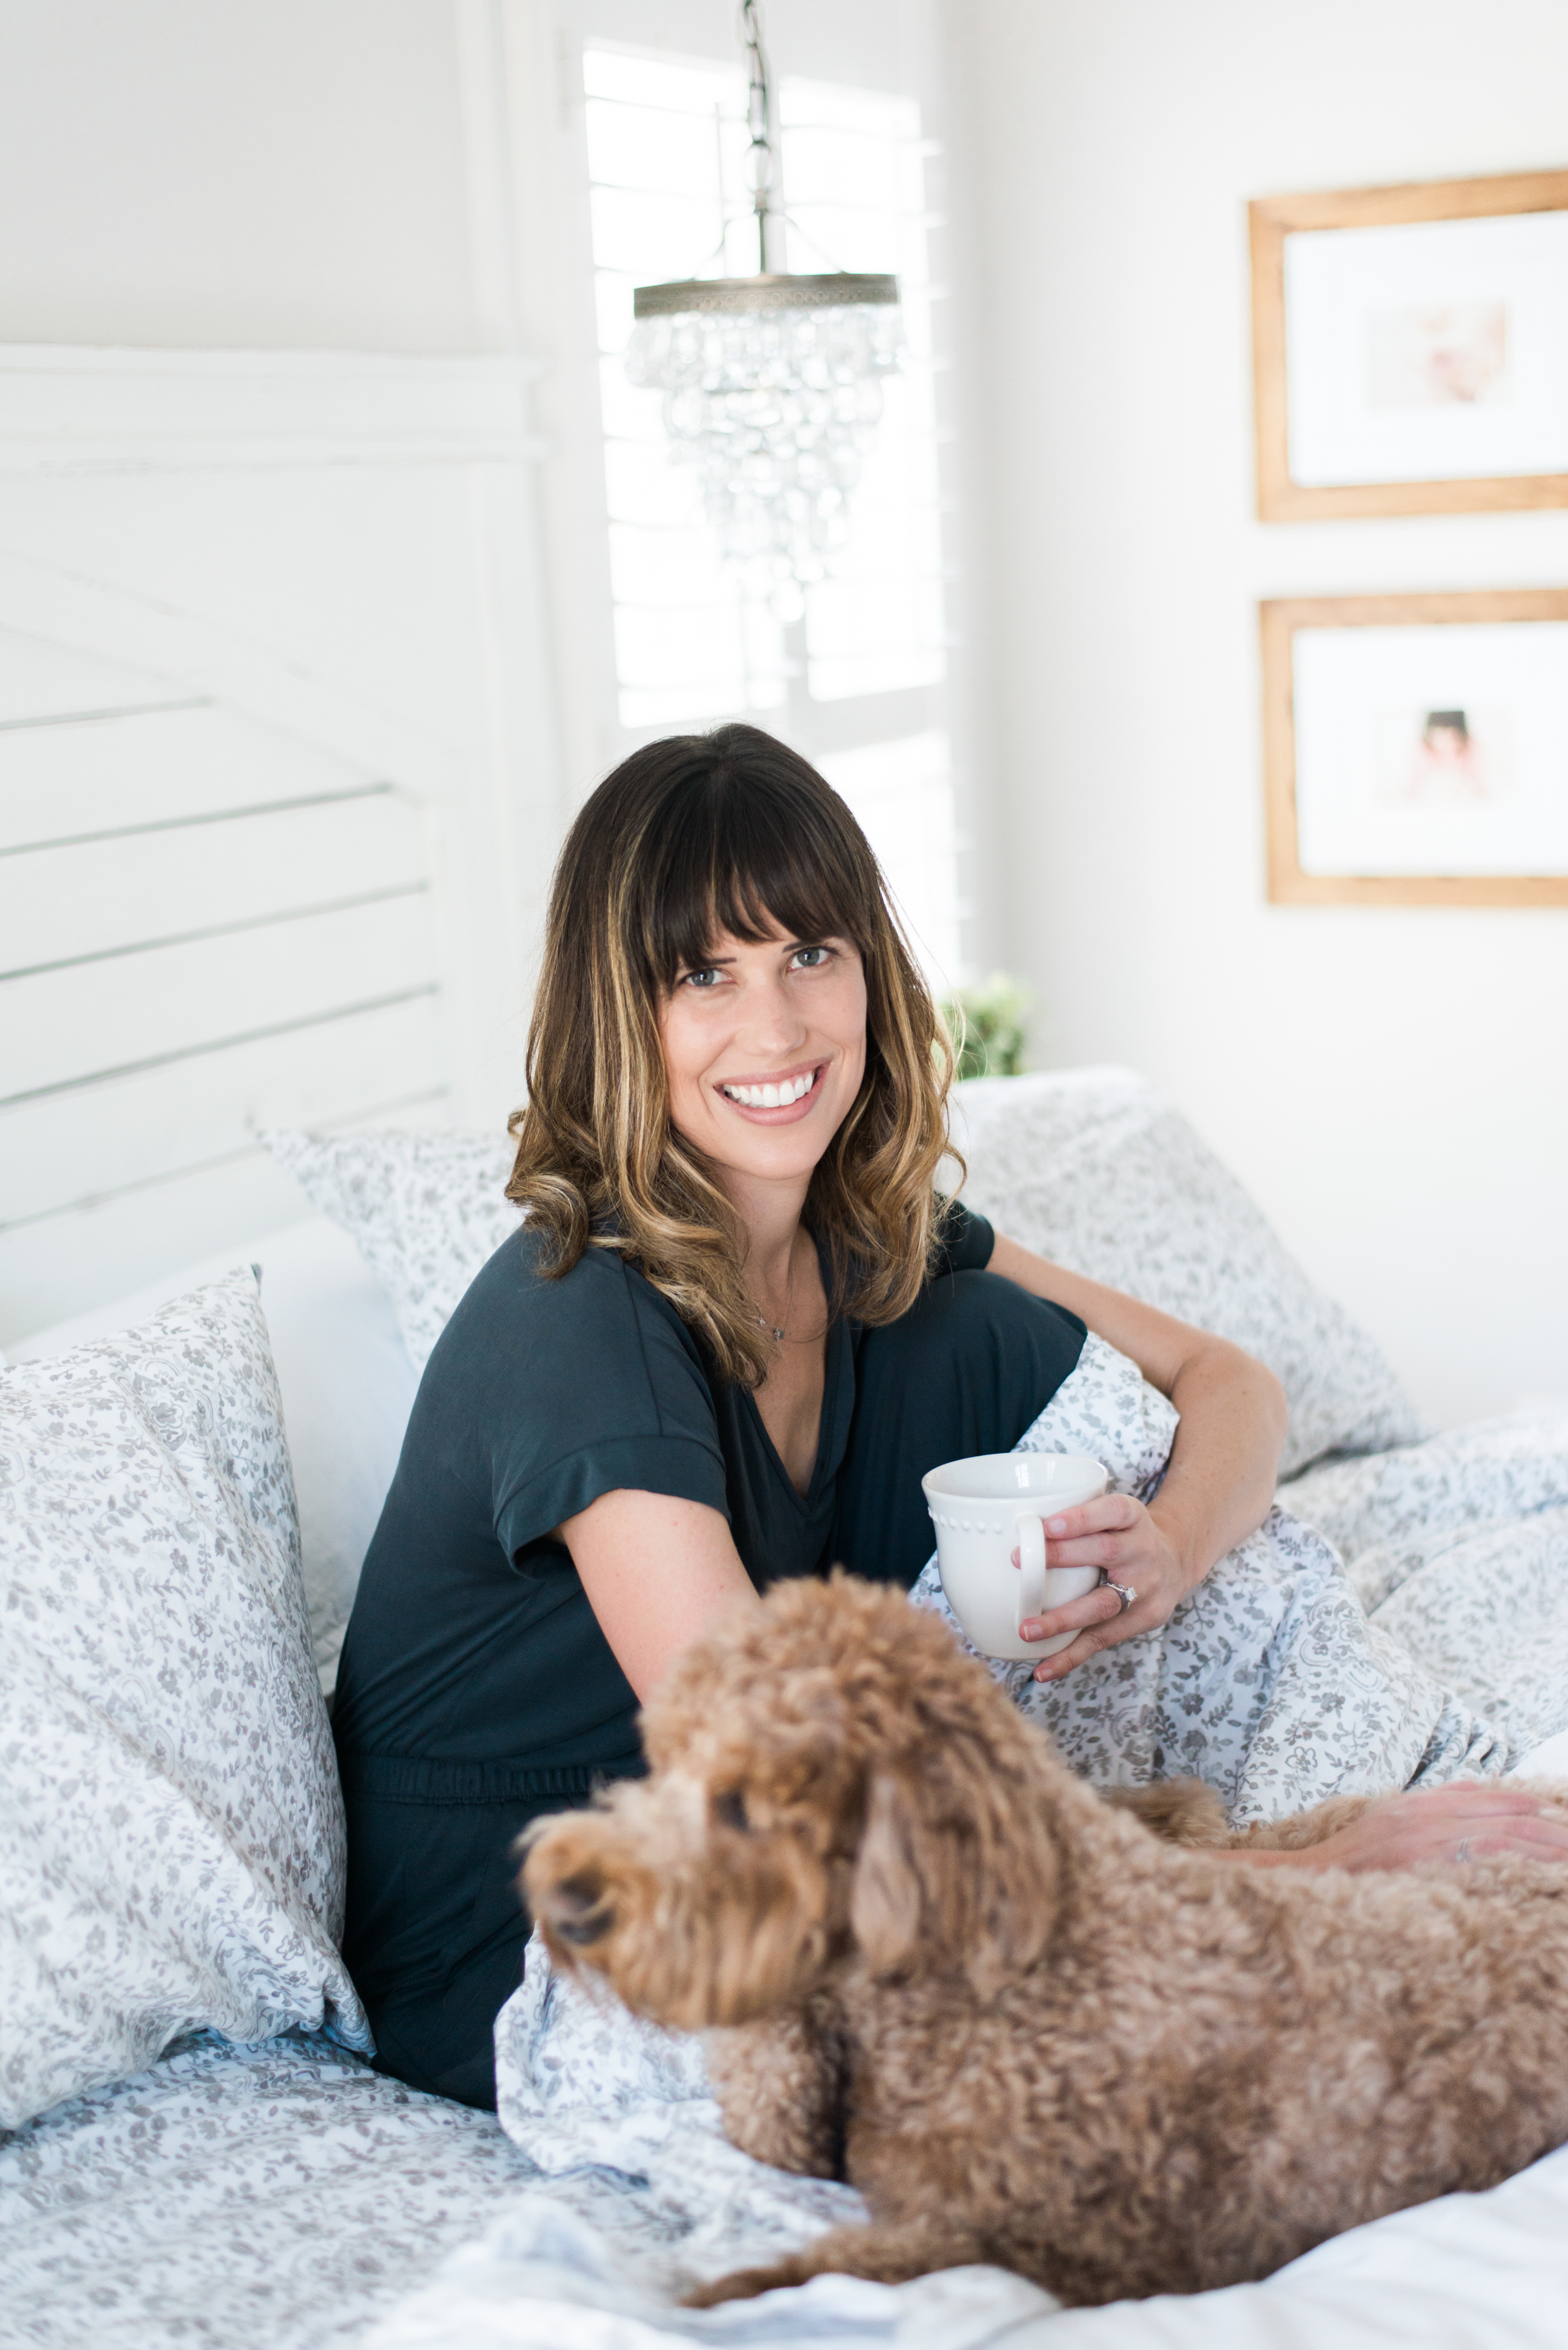 Bookmark this post for the perfect master bedroom reveal thanks to Motherhood and Lifestyle blogger Meghan Basinger. Master Bedroom Inspiration - Master Bedroom Reveal 